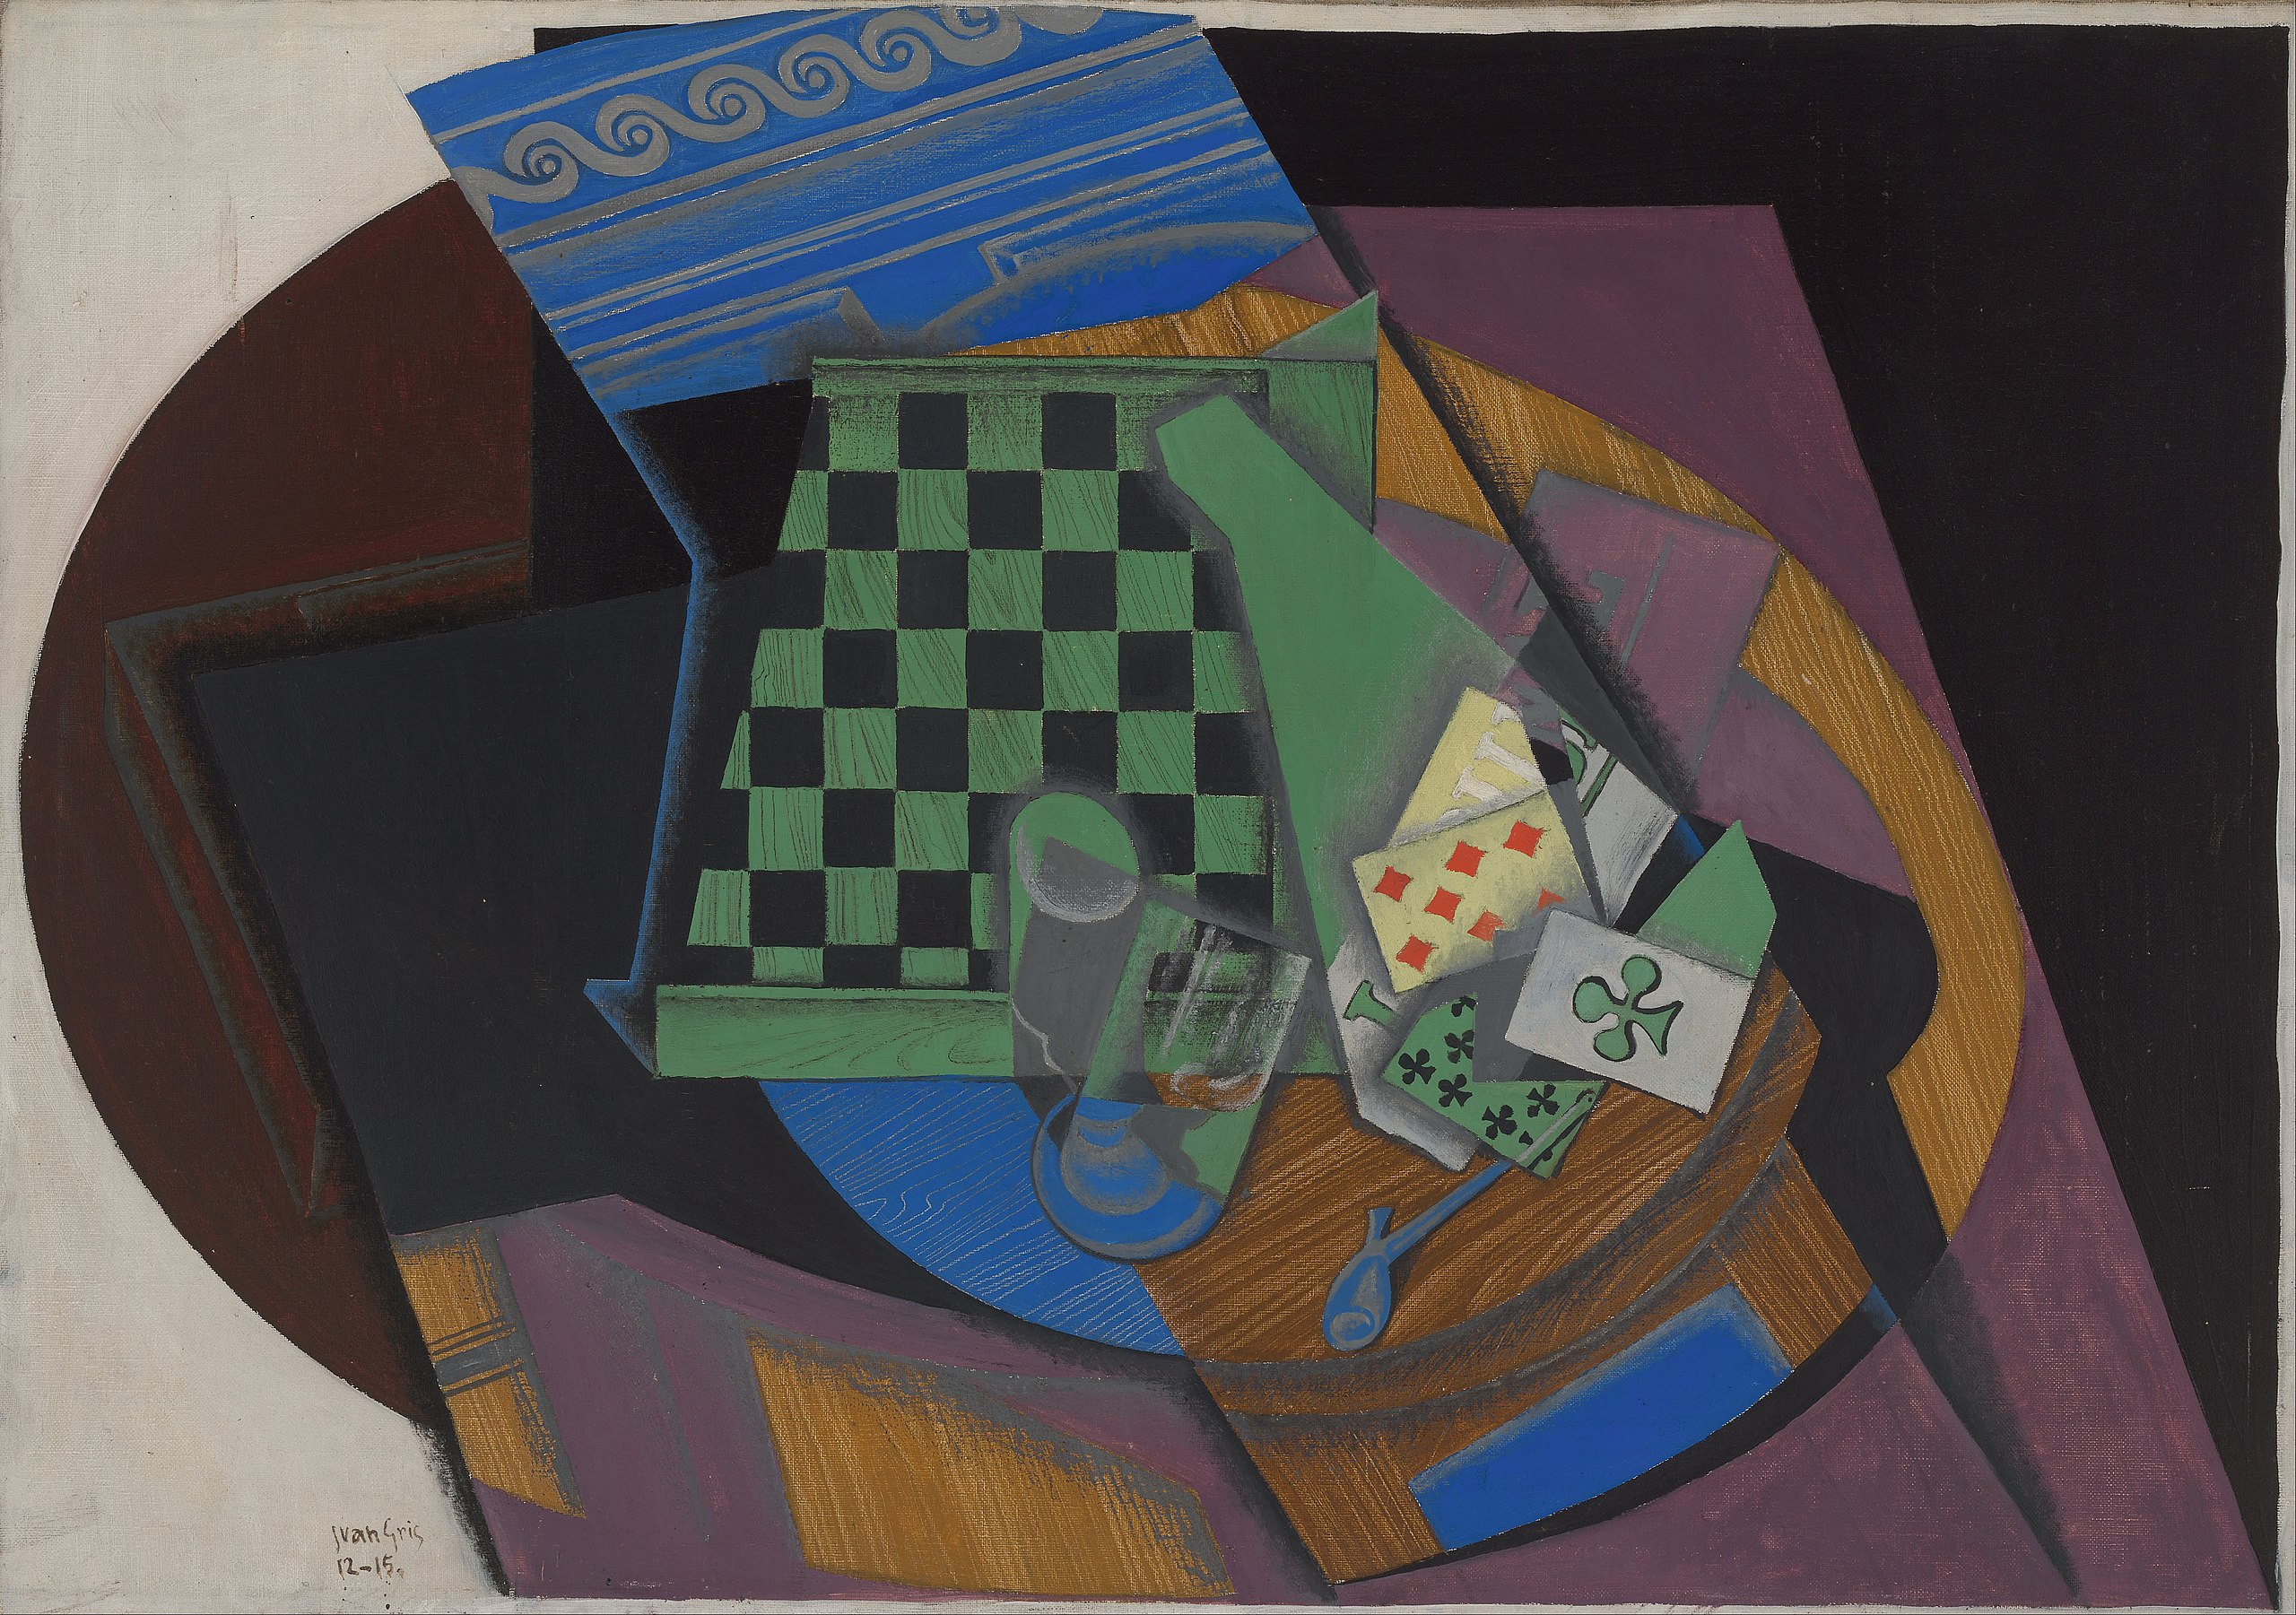 Checkerboard and Playing Cards by Juan Gris - 1915 - 92 x 65 cm National Gallery of Australia